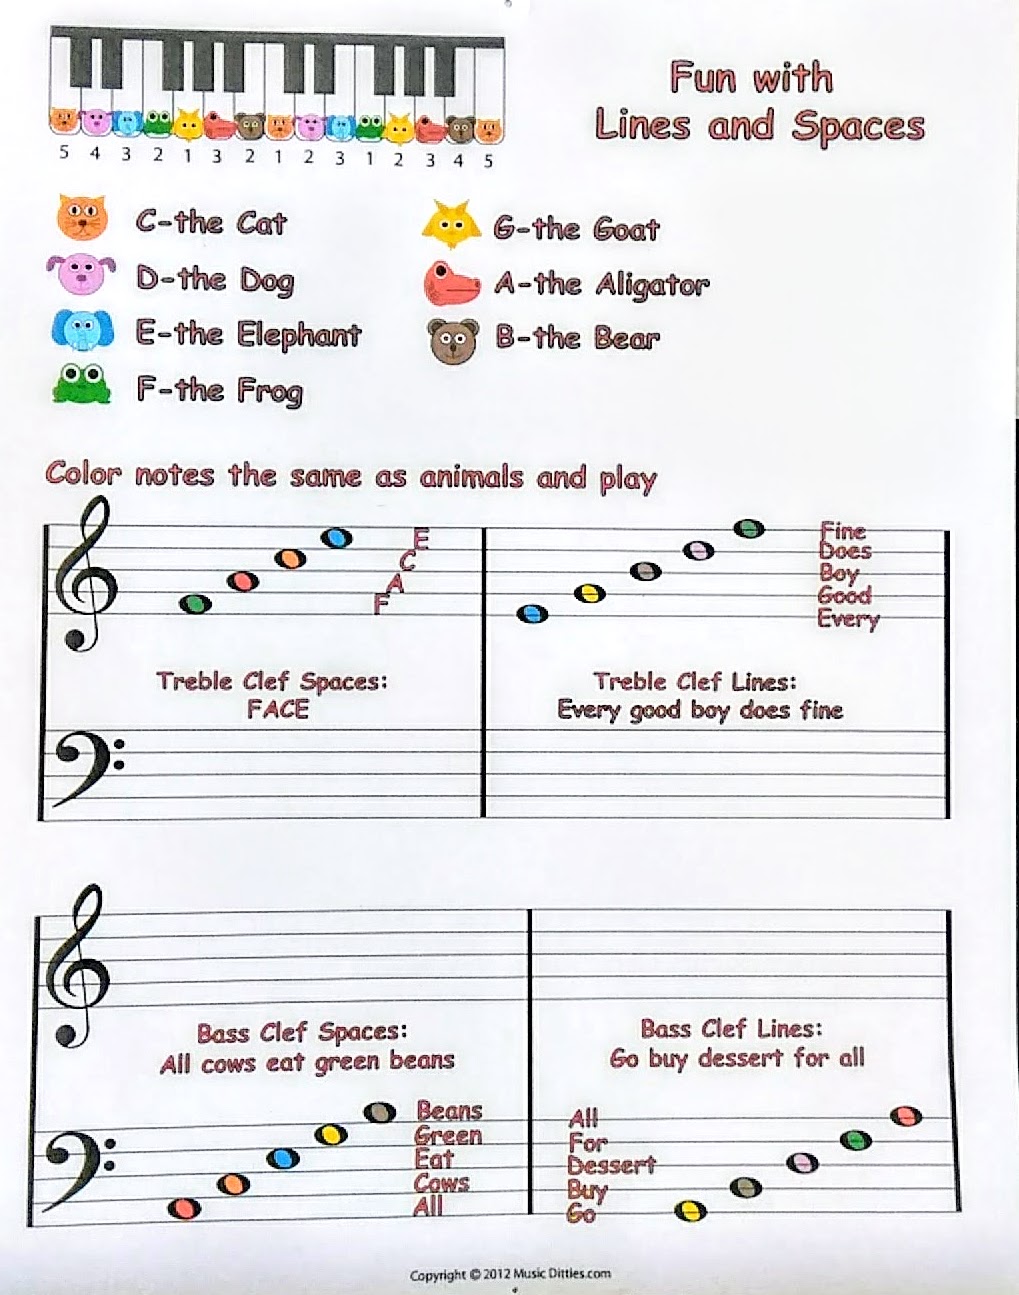 A sheet music with the names of different animals.